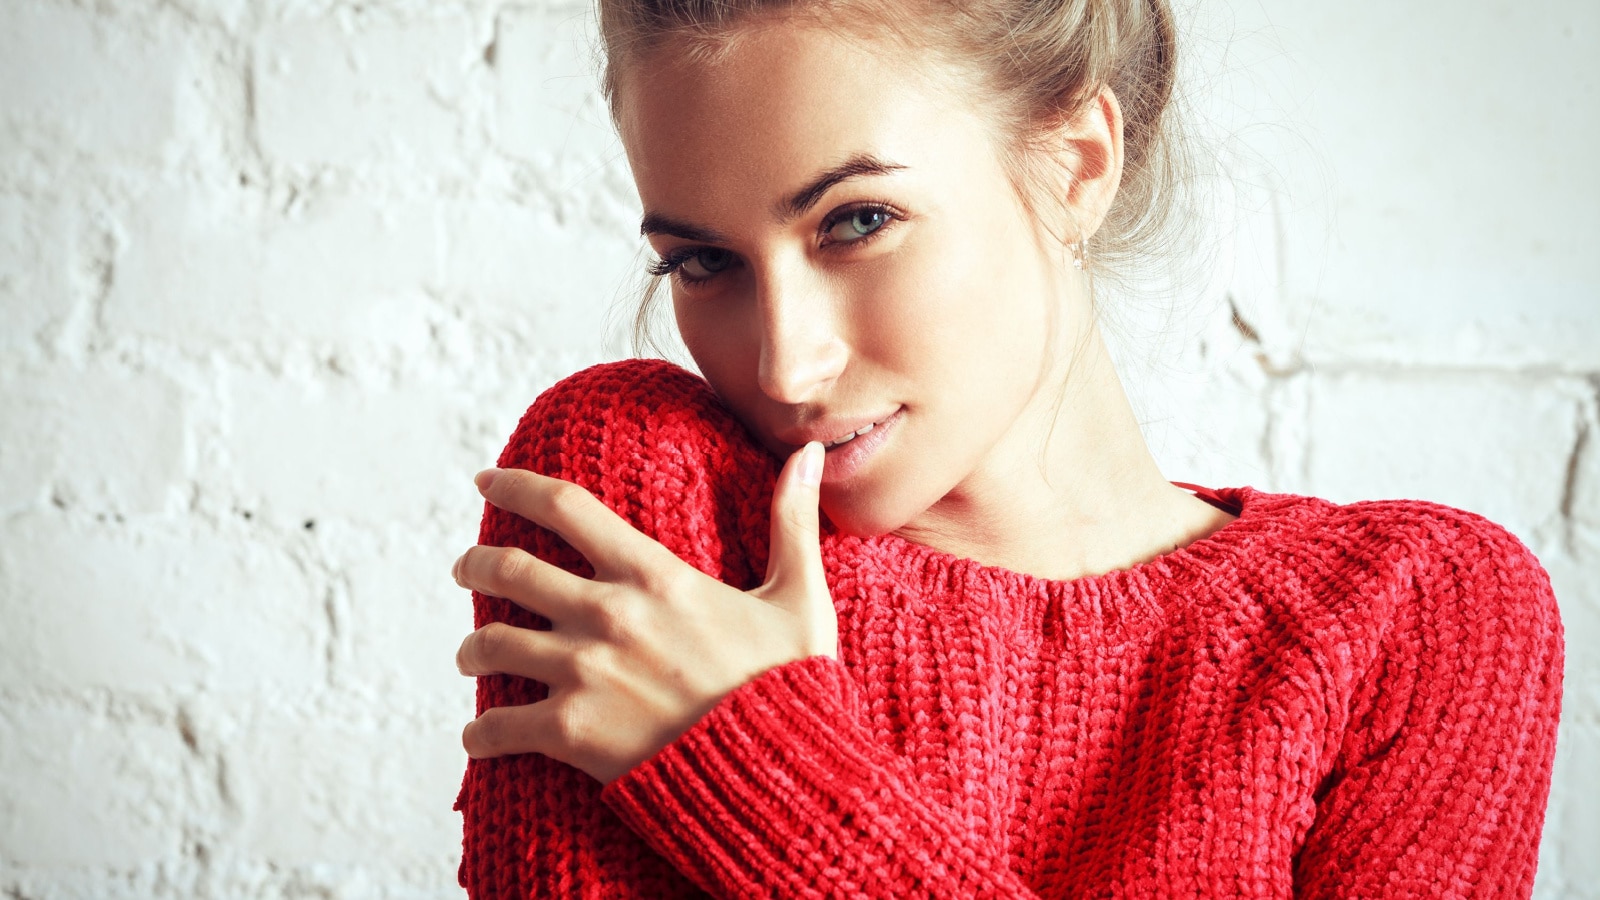 beautiful happy smiling blonde woman girl in warm red sweater. Glamour style portrait